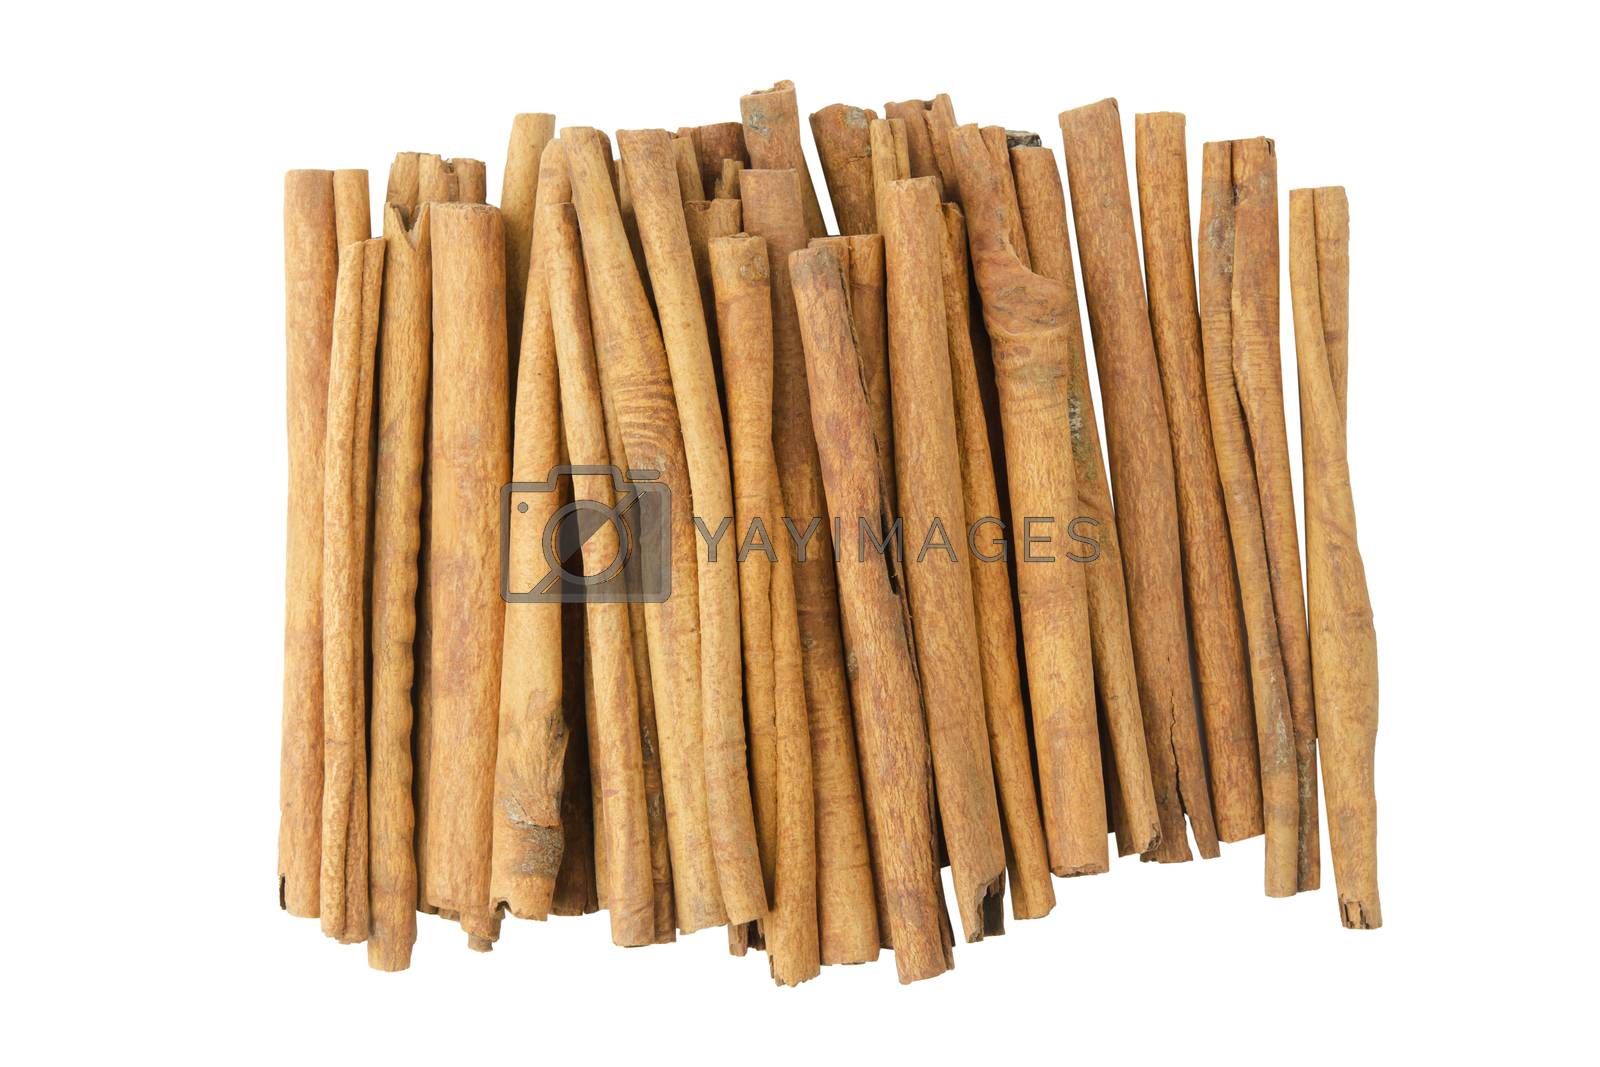 Royalty free image of Cinnamon sticks top view isolated on white background with clipp by sunnygb5